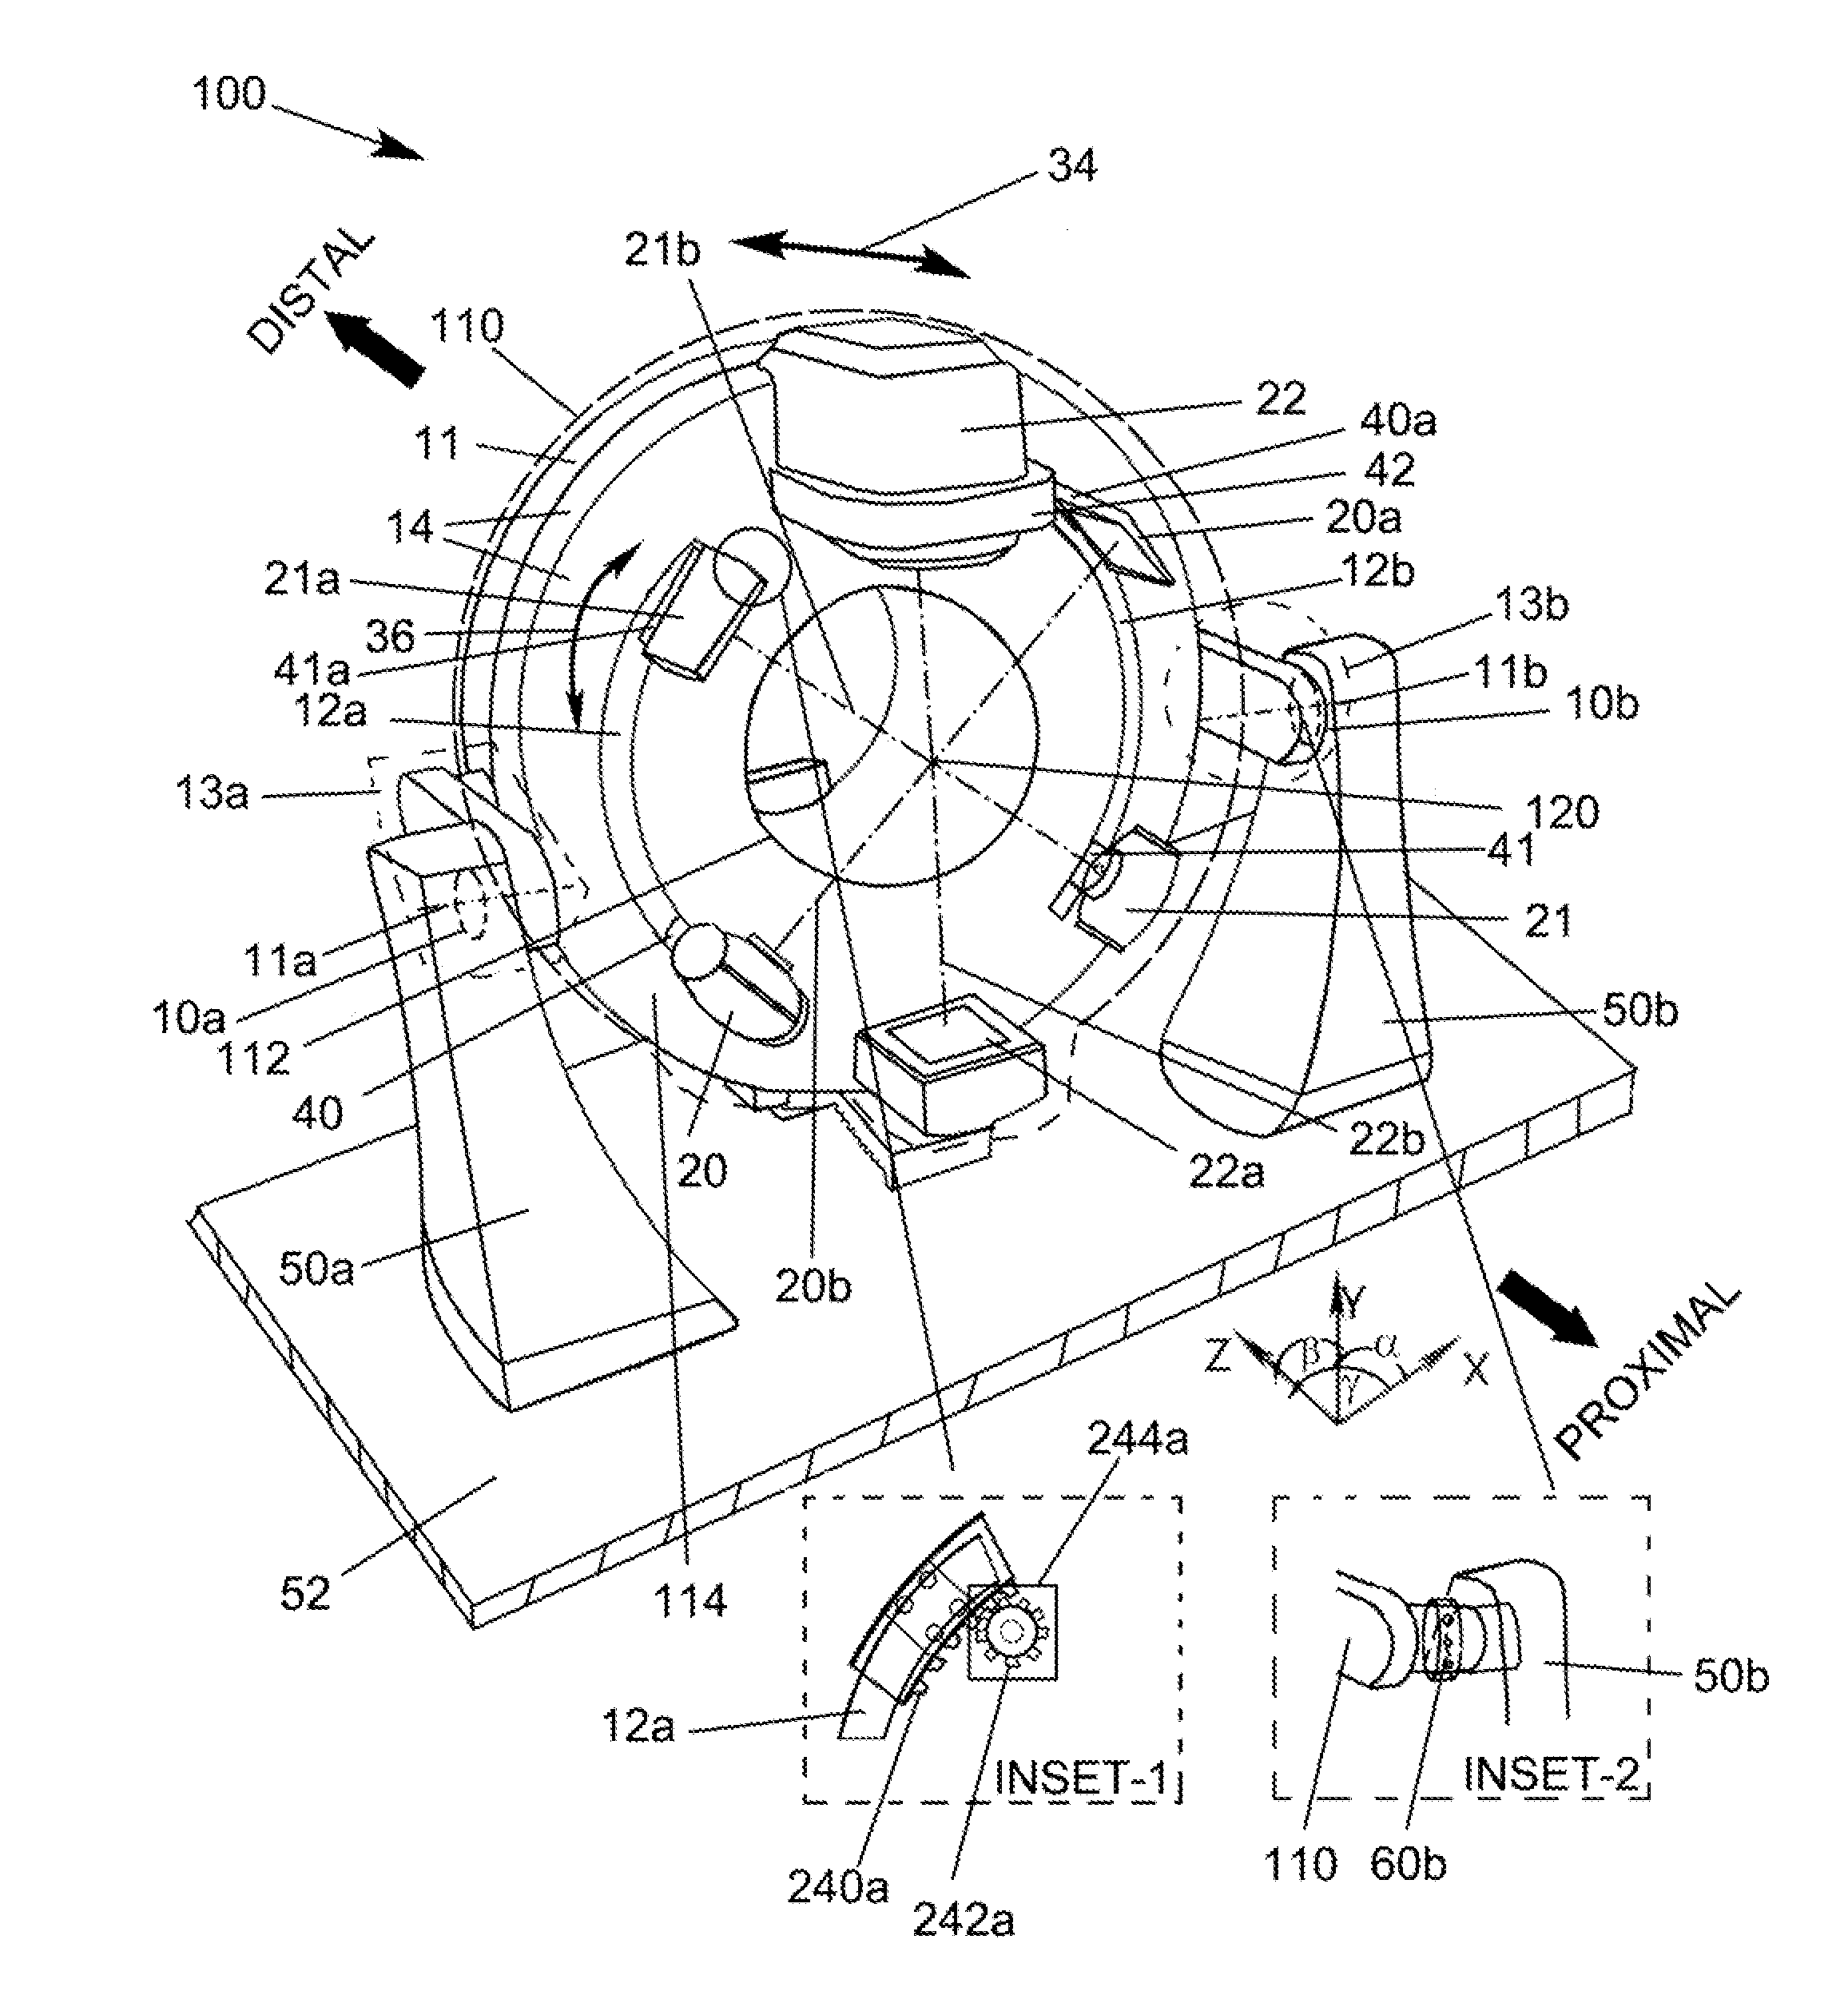 Spherical rotational radiation therapy apparatus